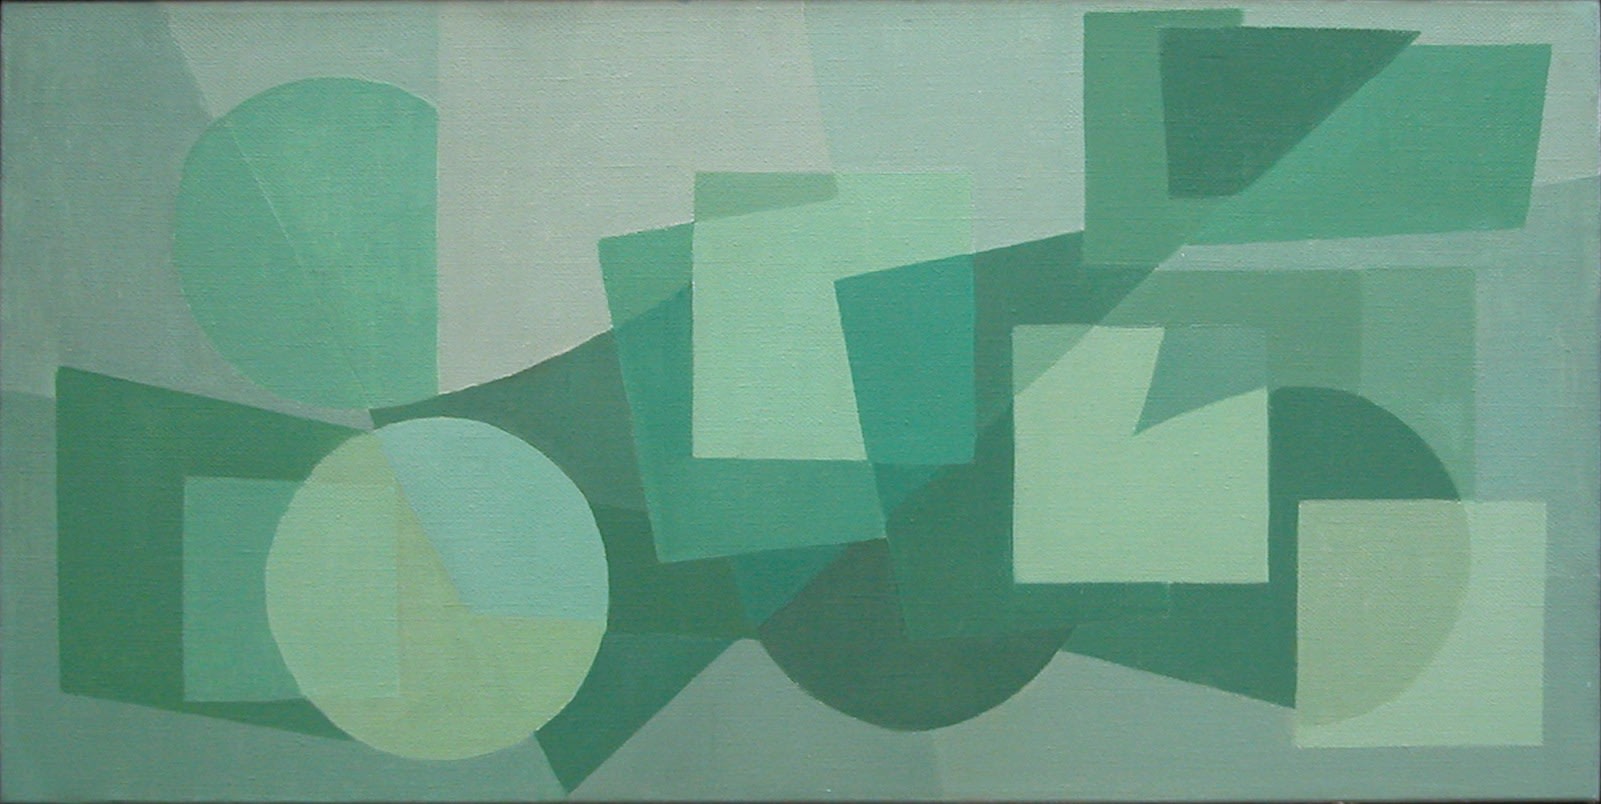 Anita Payro (1897-1980)

Untitled Abstract Composition, 1958

oil on canvas

13.78 x 27.56 inches; 35 x 70 centimeters

LSFA# 11130